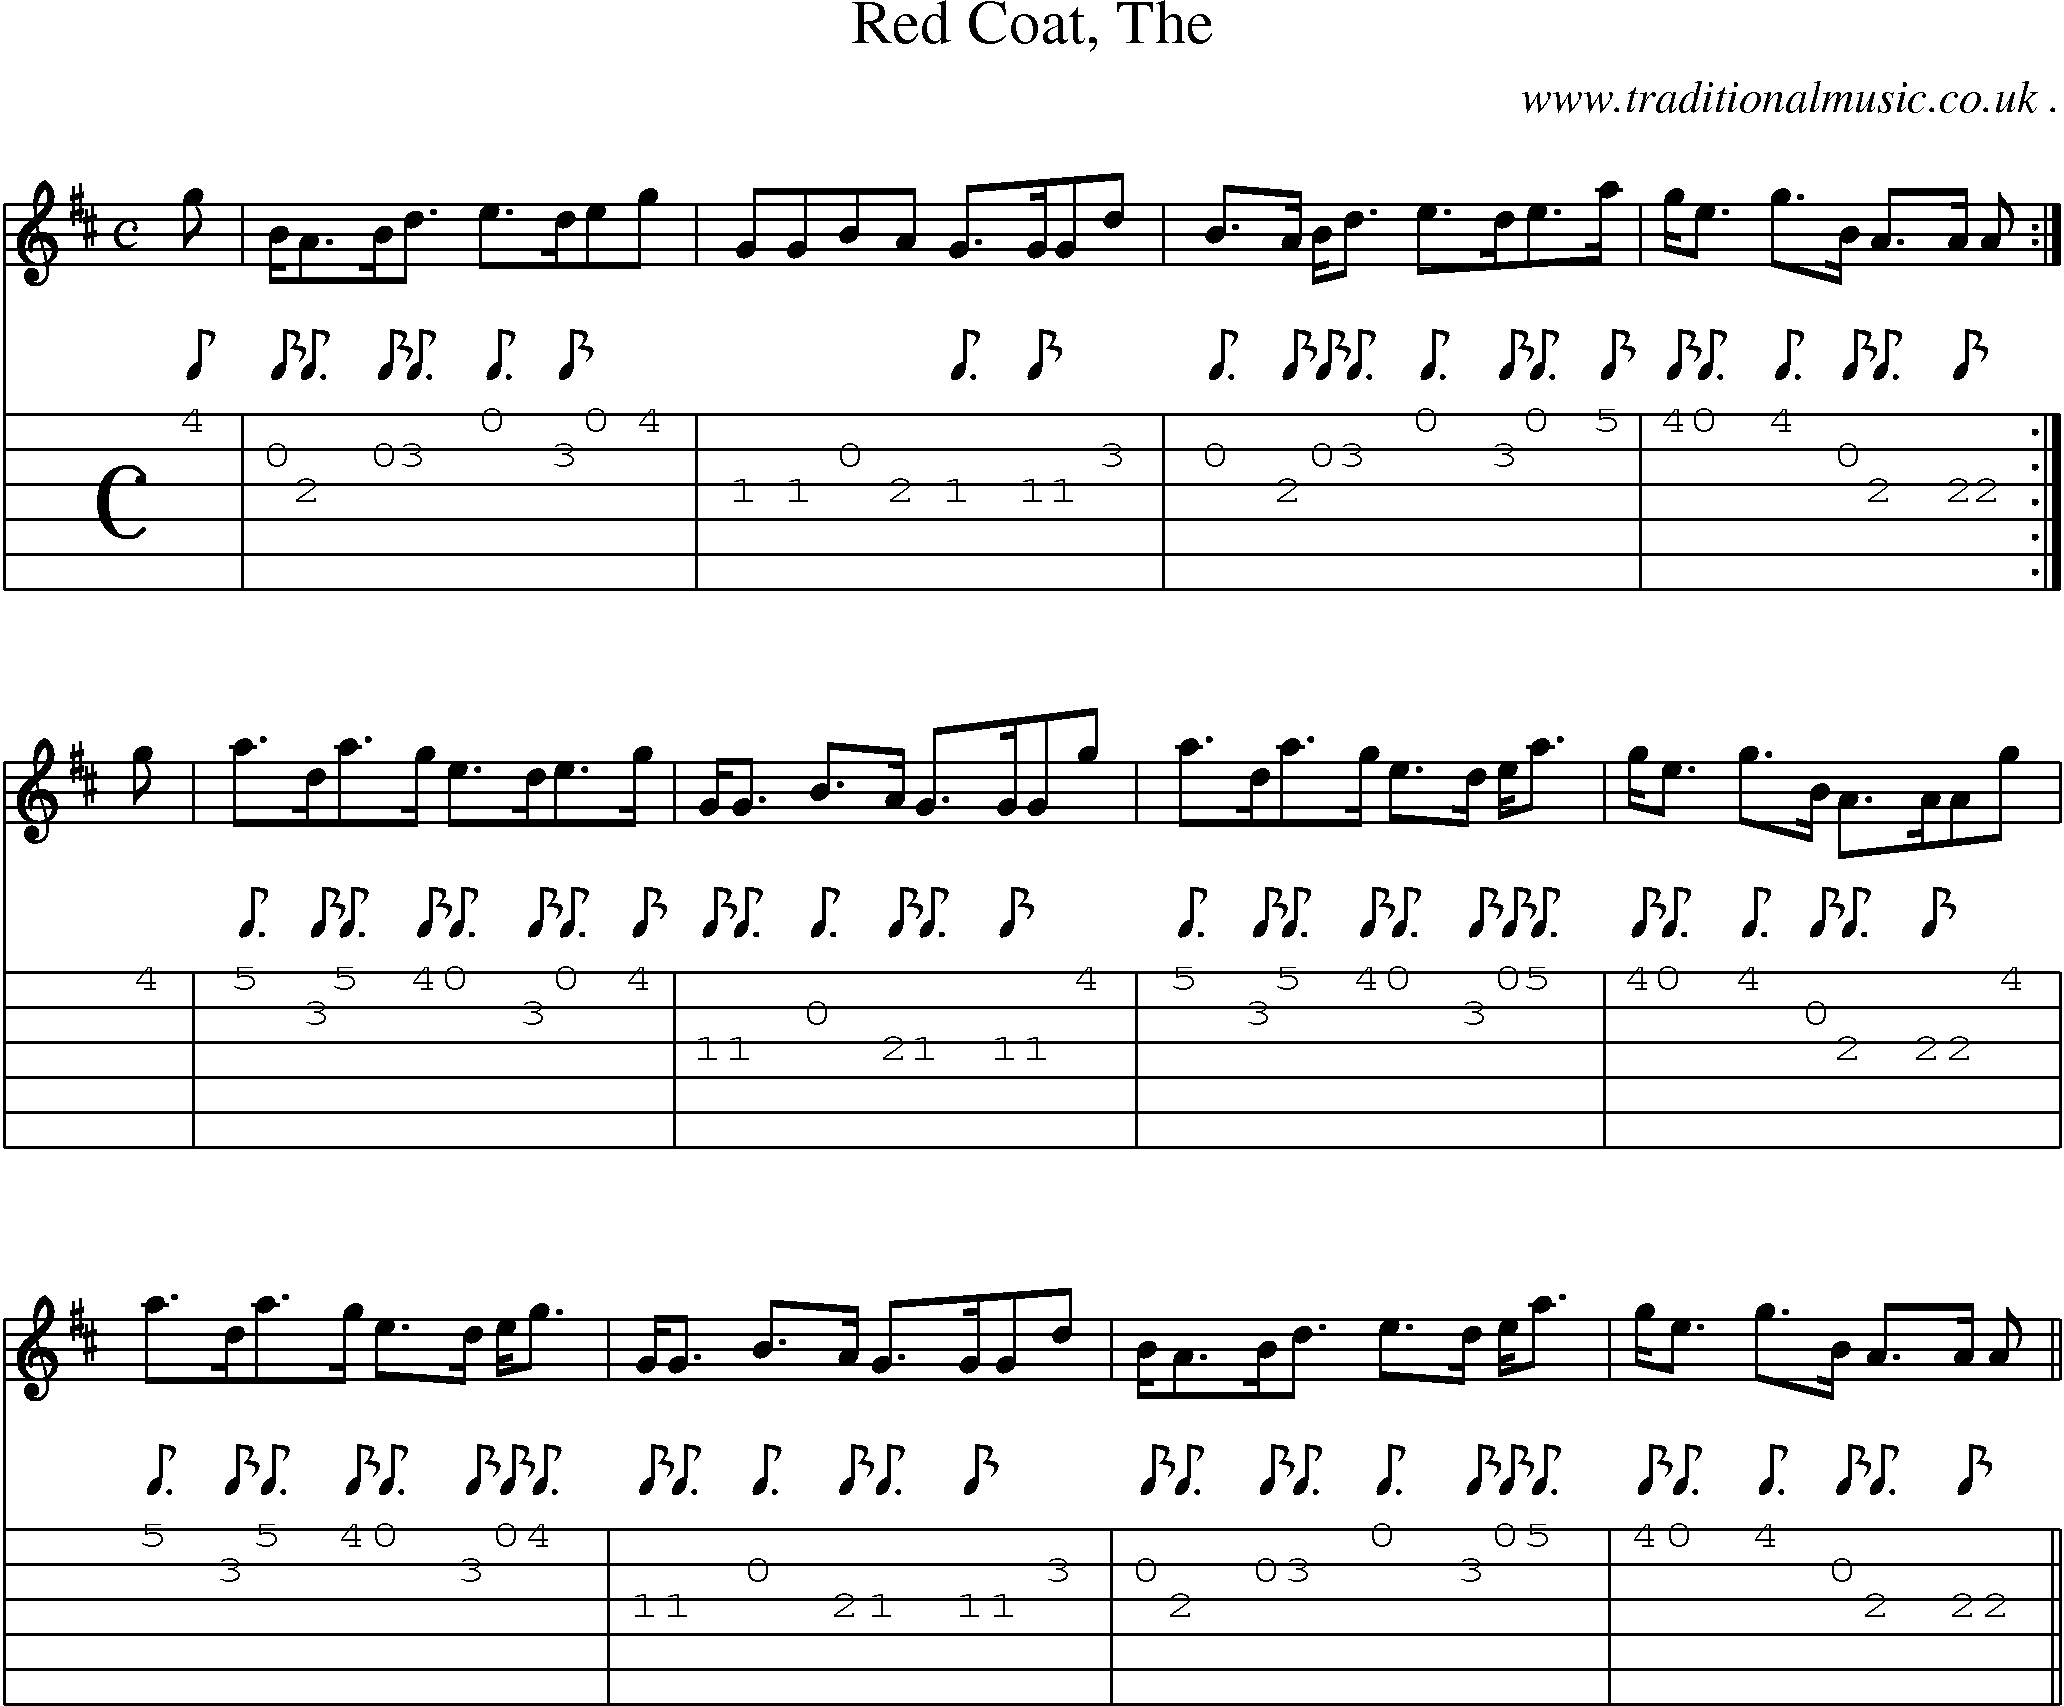 Sheet-music  score, Chords and Guitar Tabs for Red Coat The